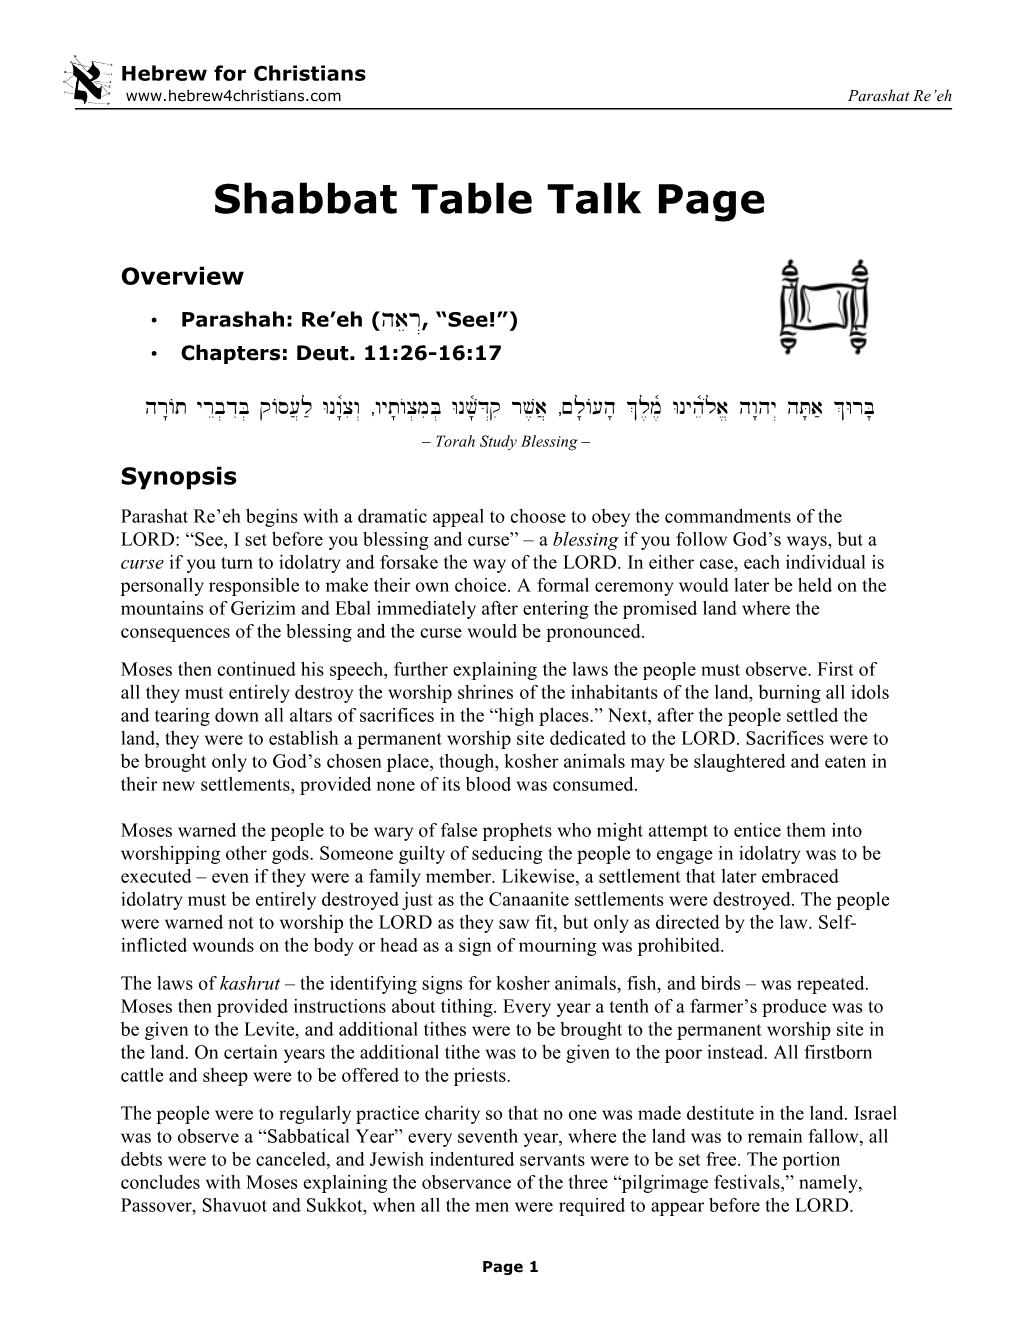 Shabbat Table Talk for Re'eh